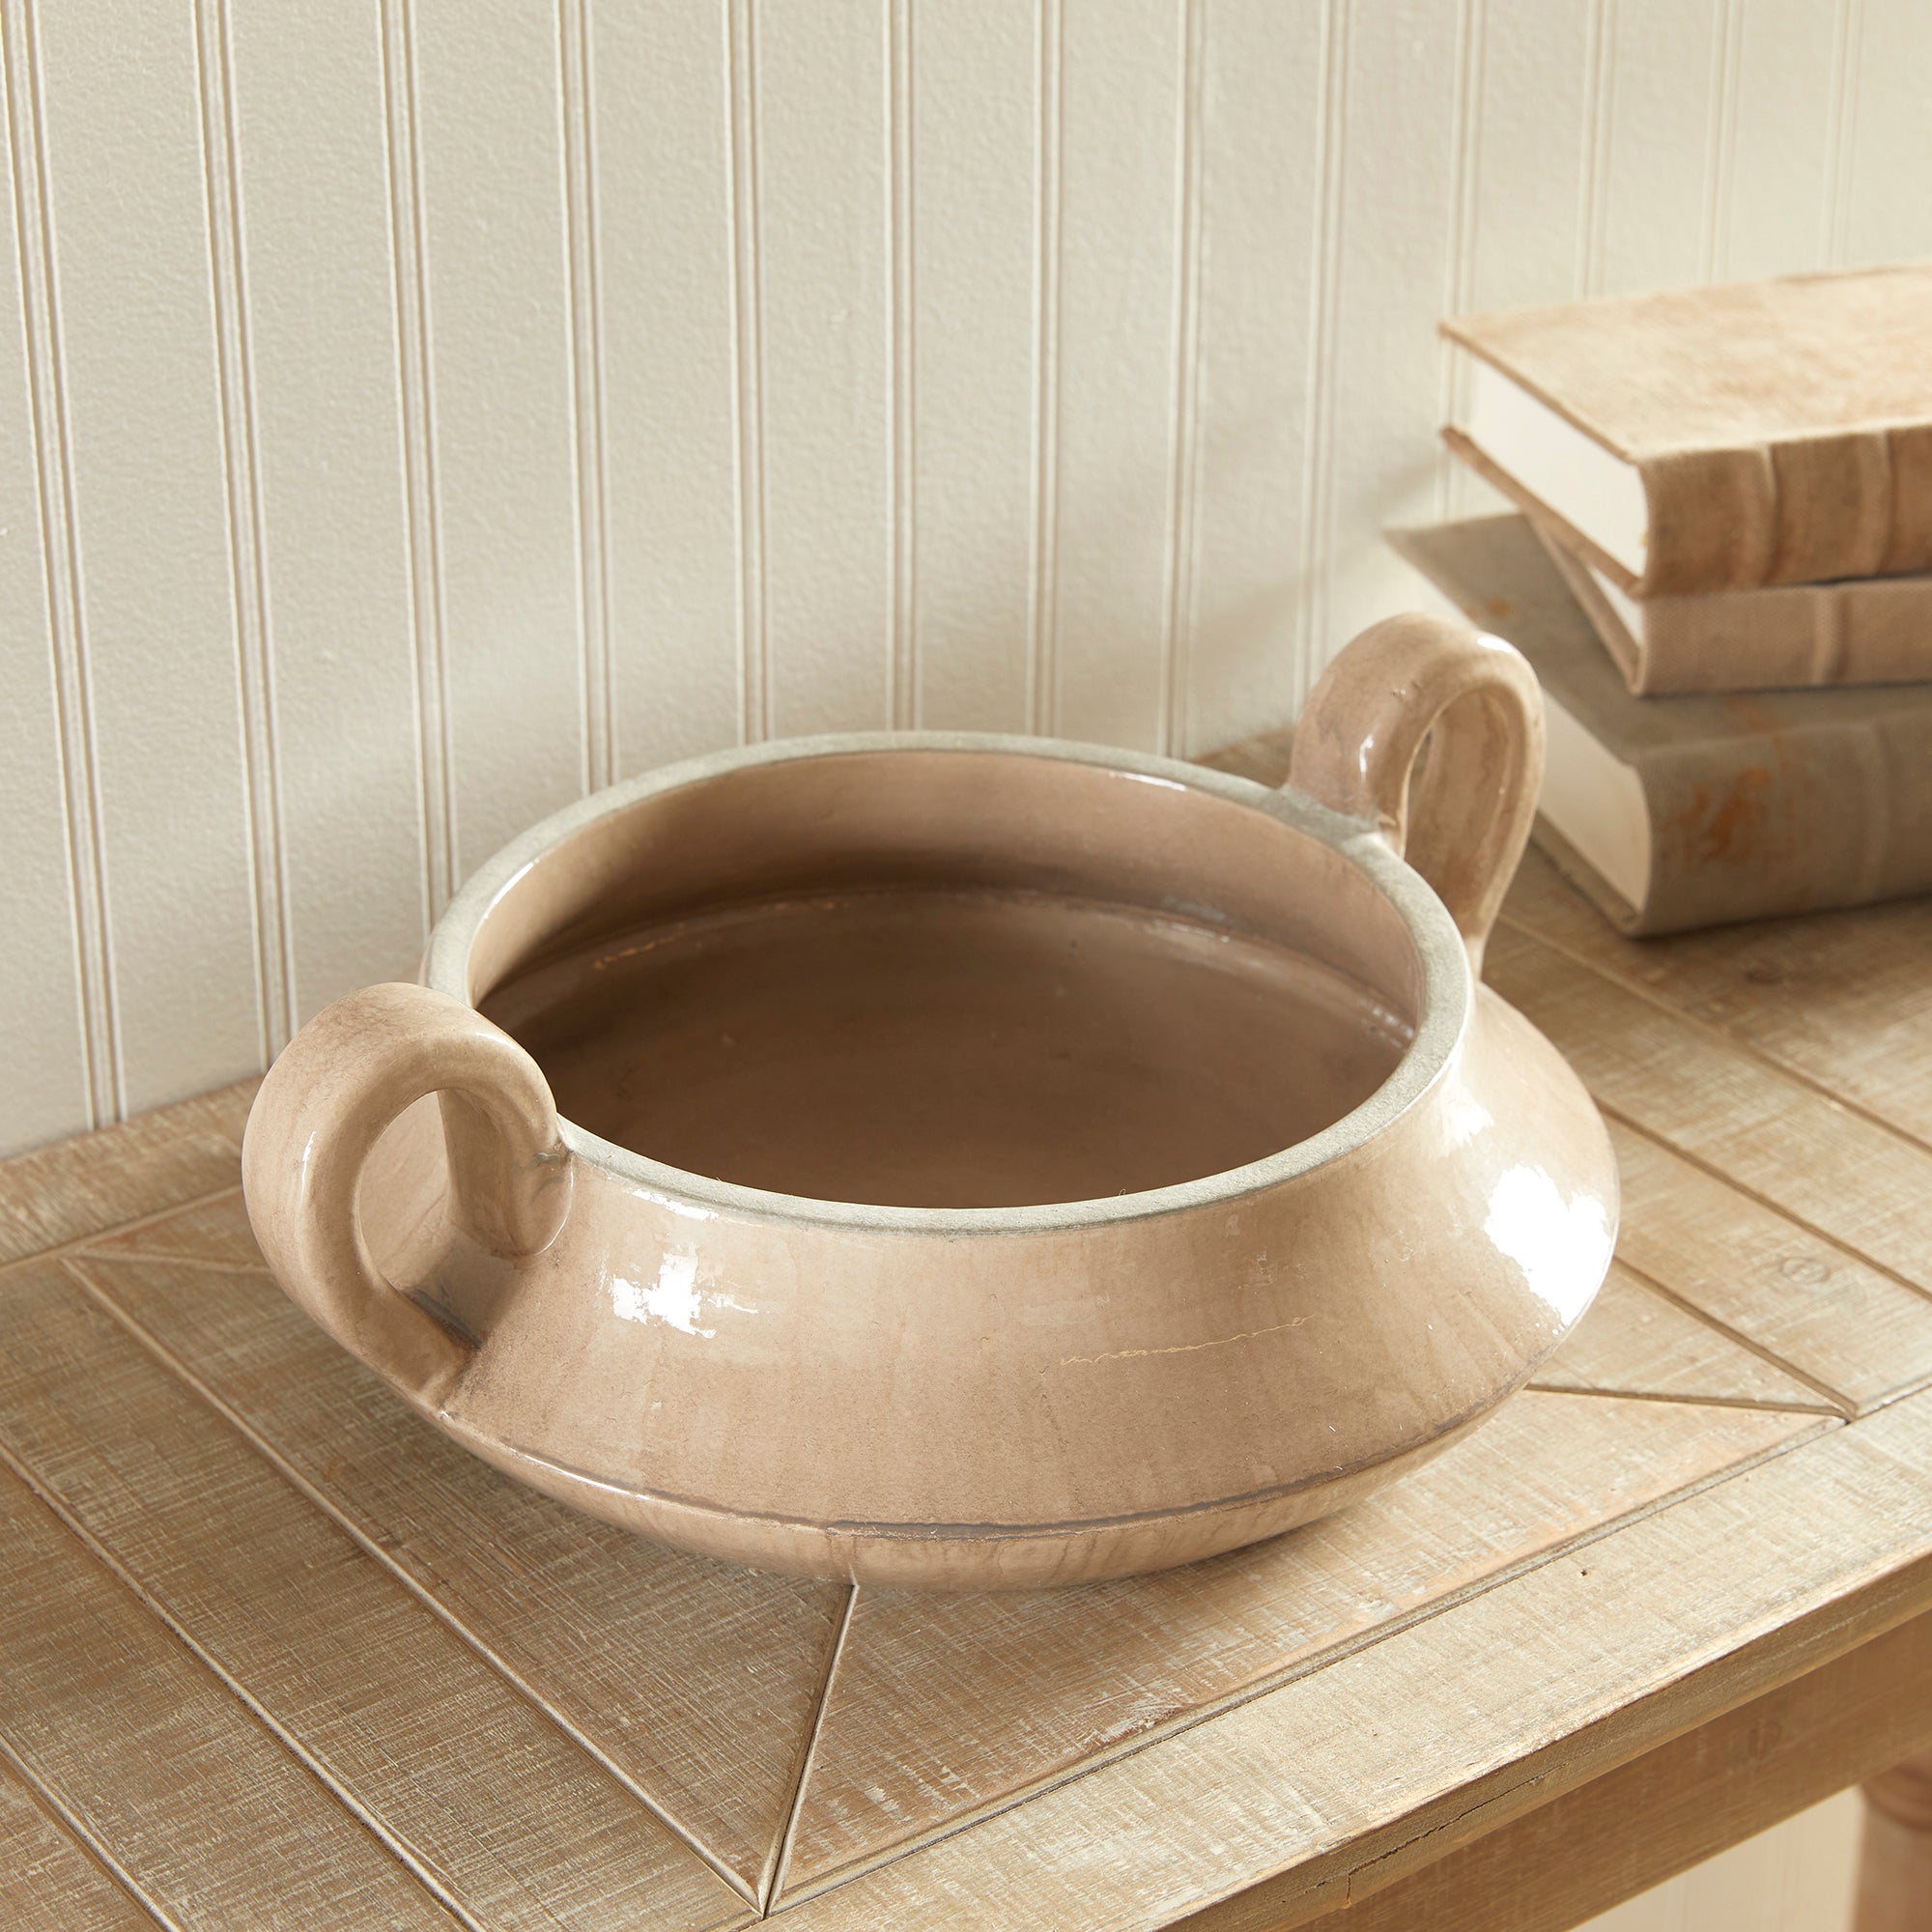 This vintage-inspired perfectly taupe bowl is not short on character and charm. From the unique shape, to the elevated loop handles and artistically uneven glaze, it makes a beautiful accent for kitchen or dining room. Amethyst Home provides interior design, new construction, custom furniture, and area rugs in the Newport Beach metro area.